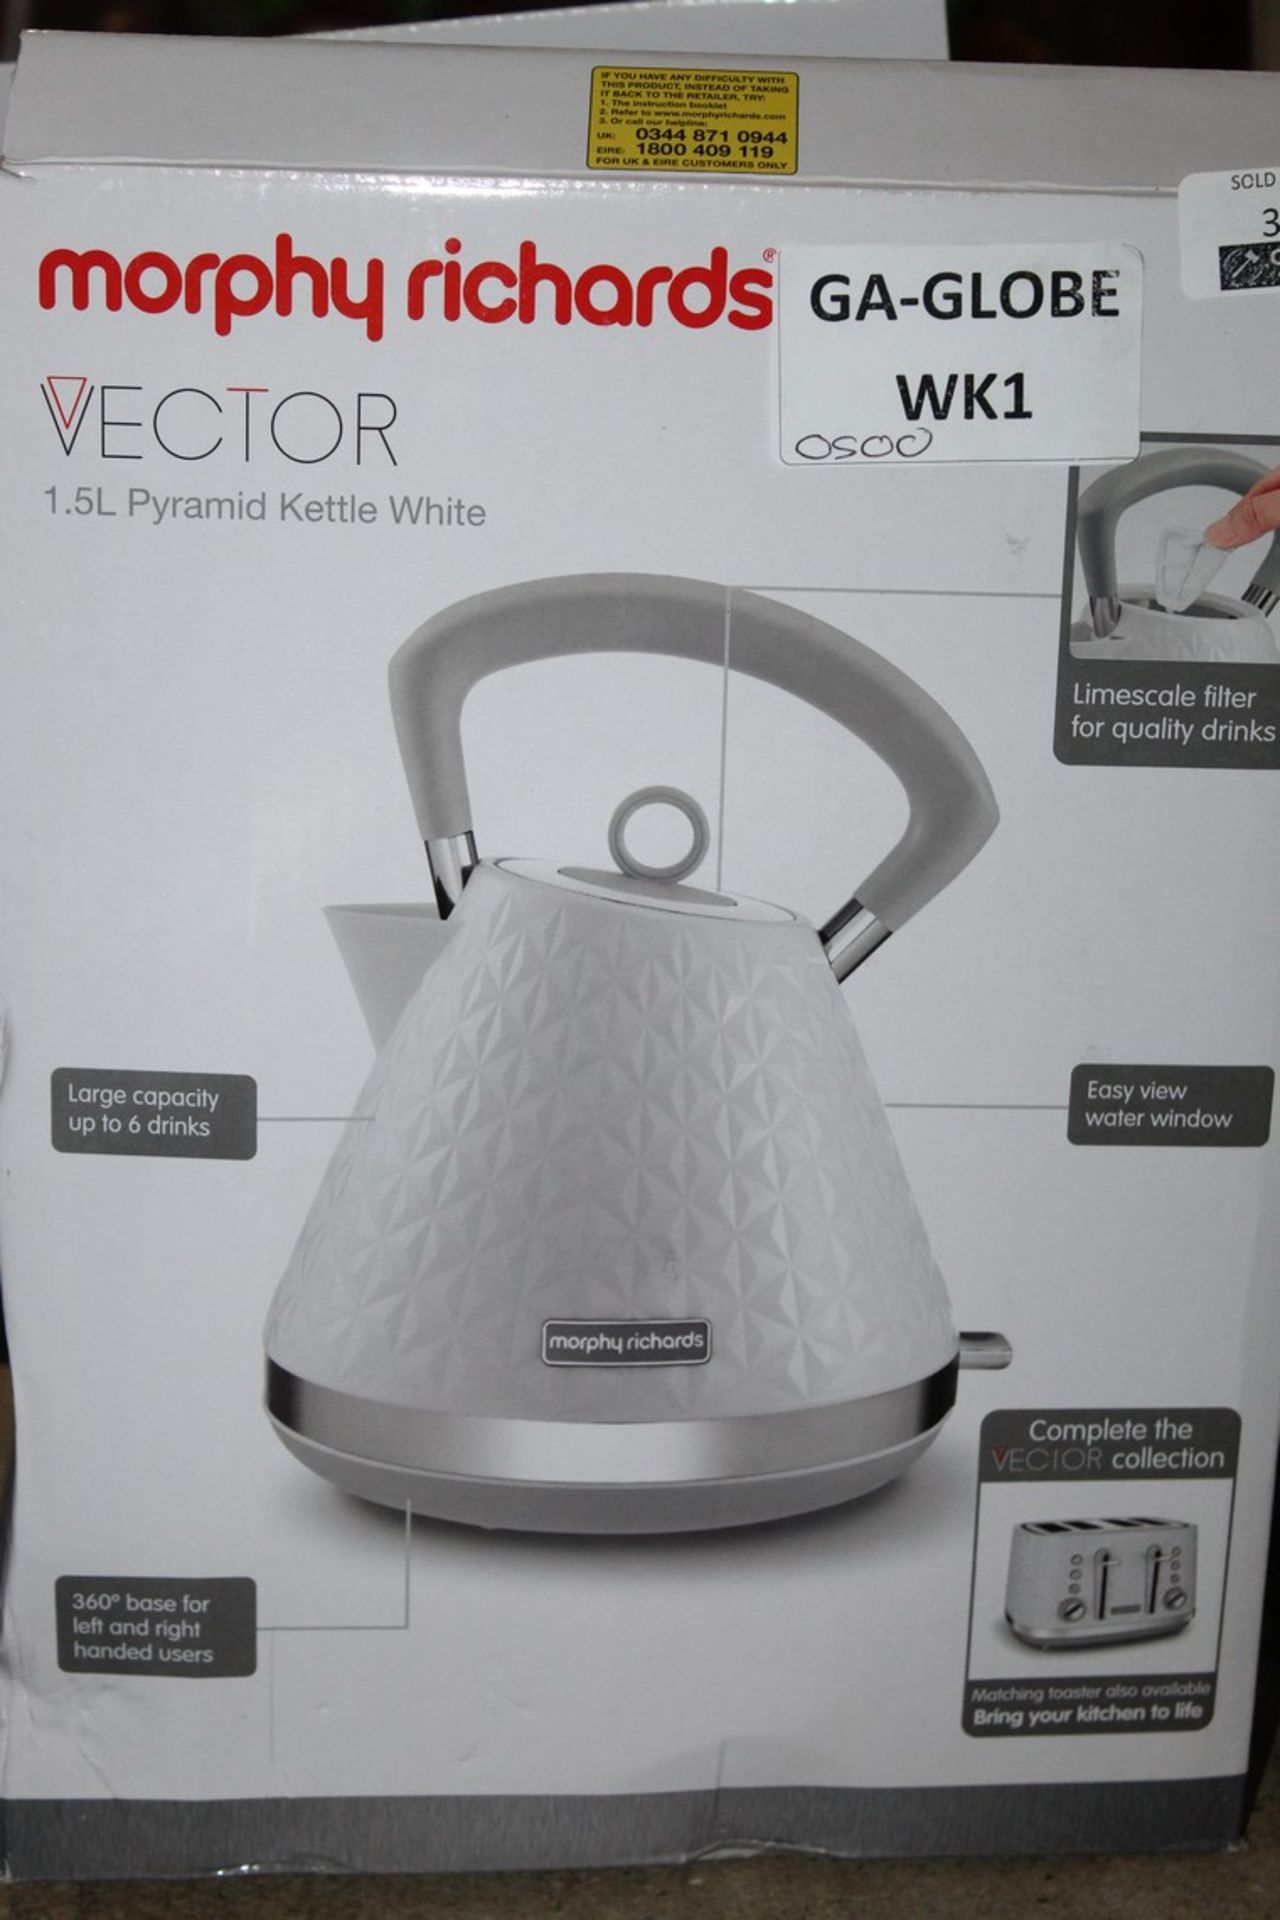 Boxed Morphy Richards Vector 1.5L Pyramid Kettle White RRP £50 (Untested Customer Returns) (Public